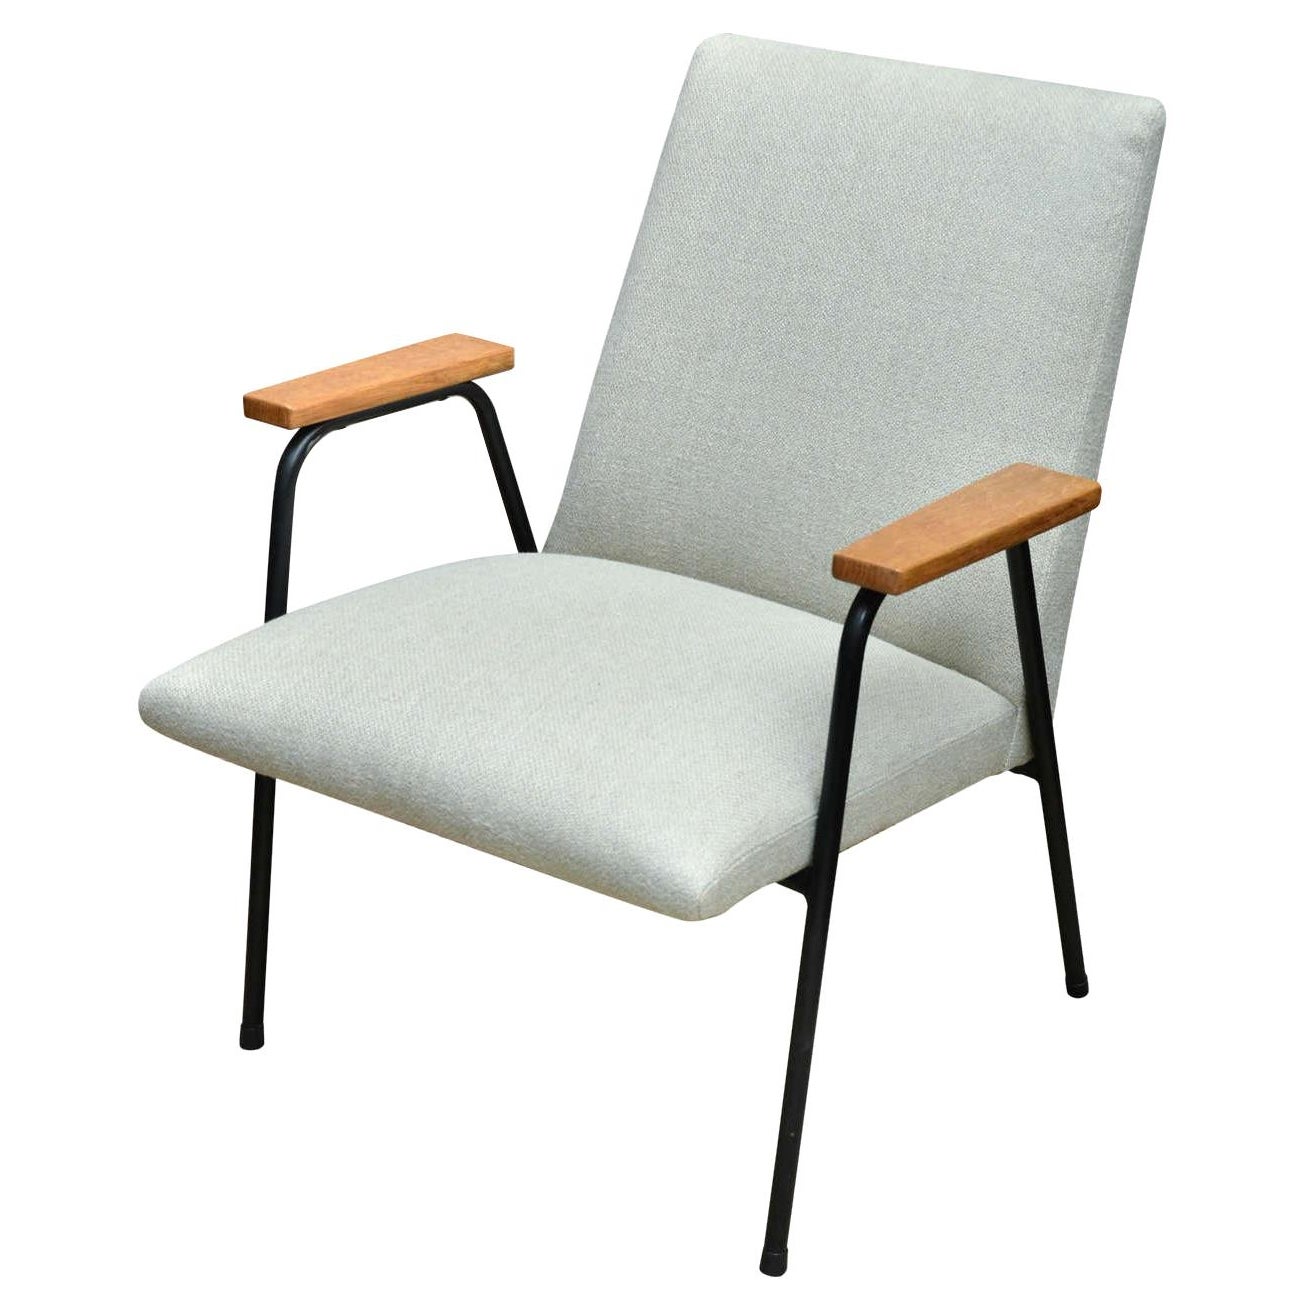 Mid-Century Upholstered Metal Armchair by Pierre Guariche, France, c. 1950s For Sale